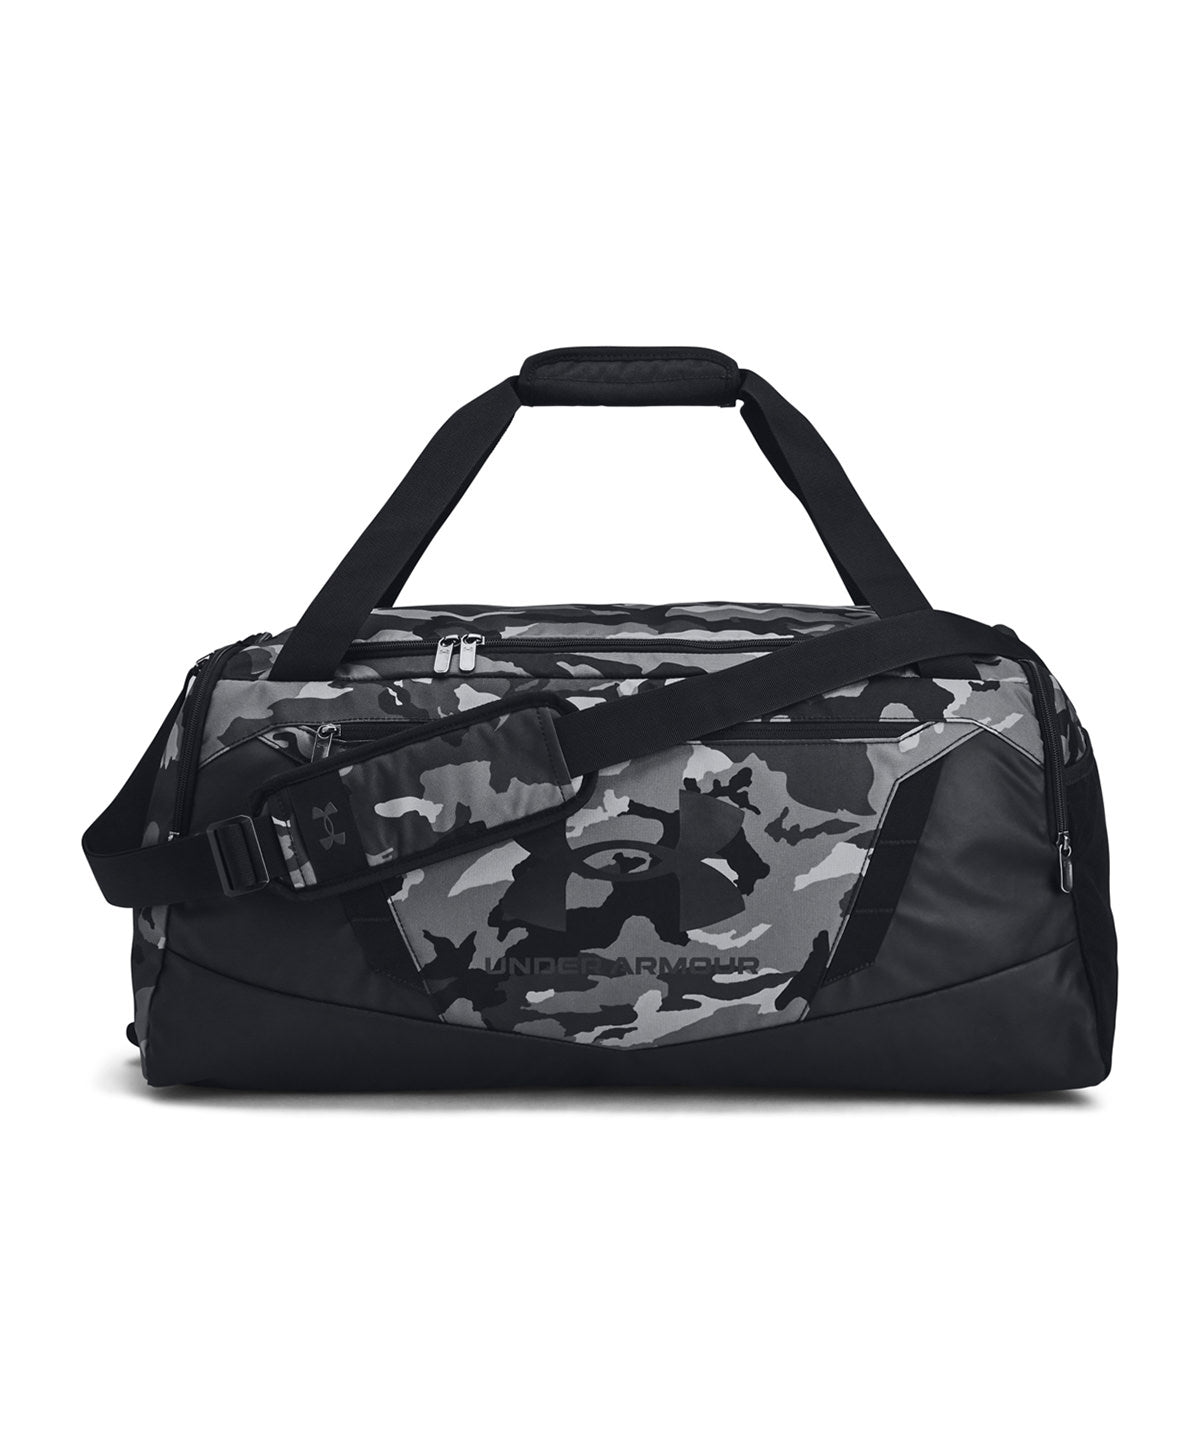 Under Armour Undeniable 5.0 MD duffle bag UA052 - COOZO